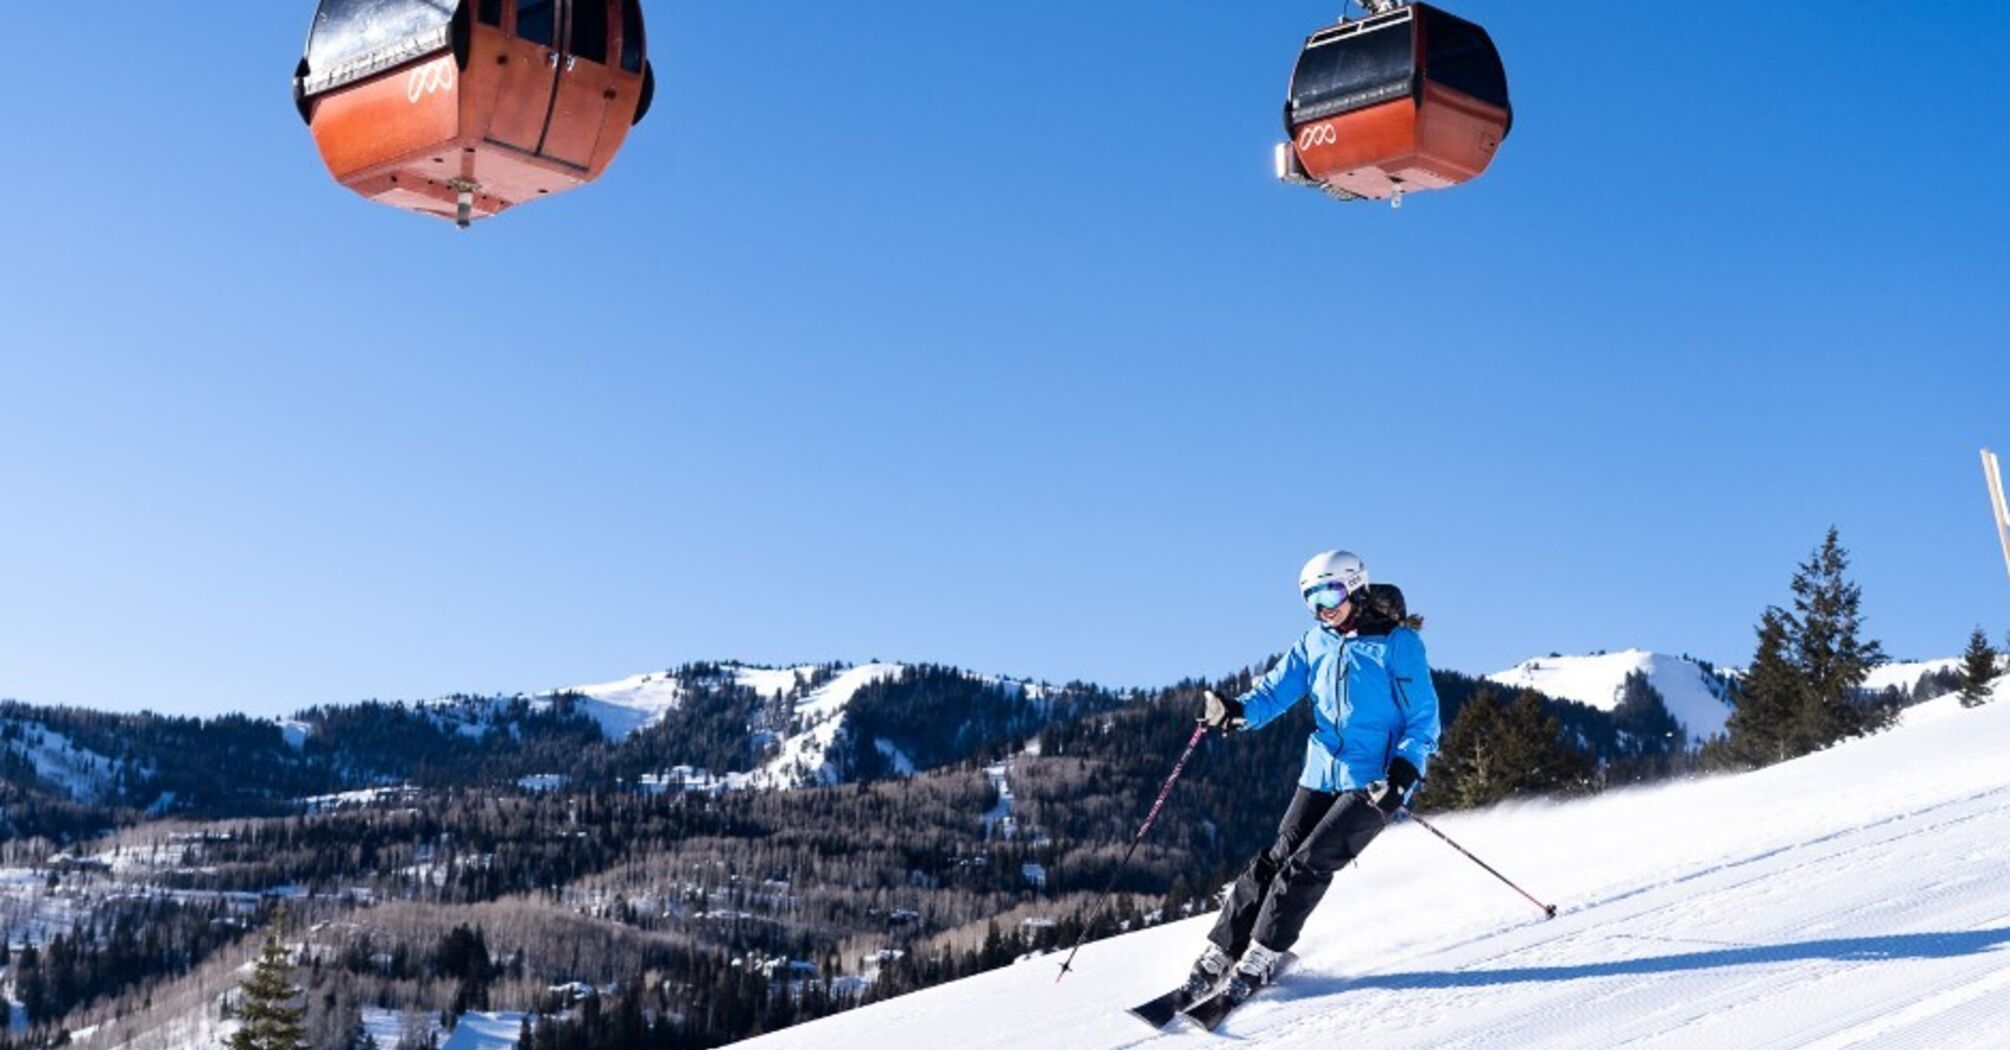 Over 7,300 acres of terrain: the most picturesque ski resort in the United States